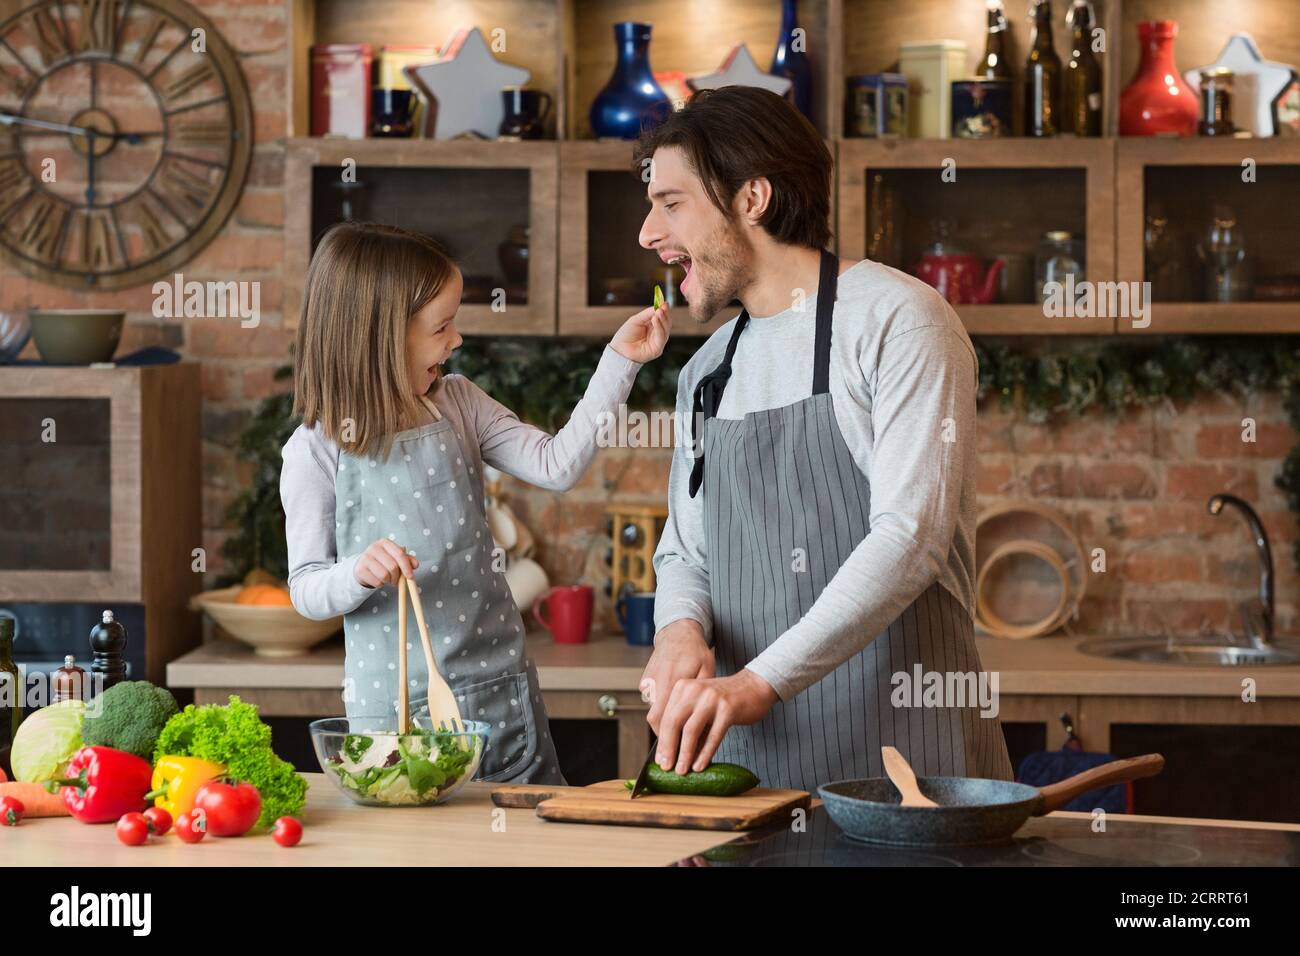 Happy Young Family Father And Daughter Having Fun While Cooking In Kitchen Stock Photo